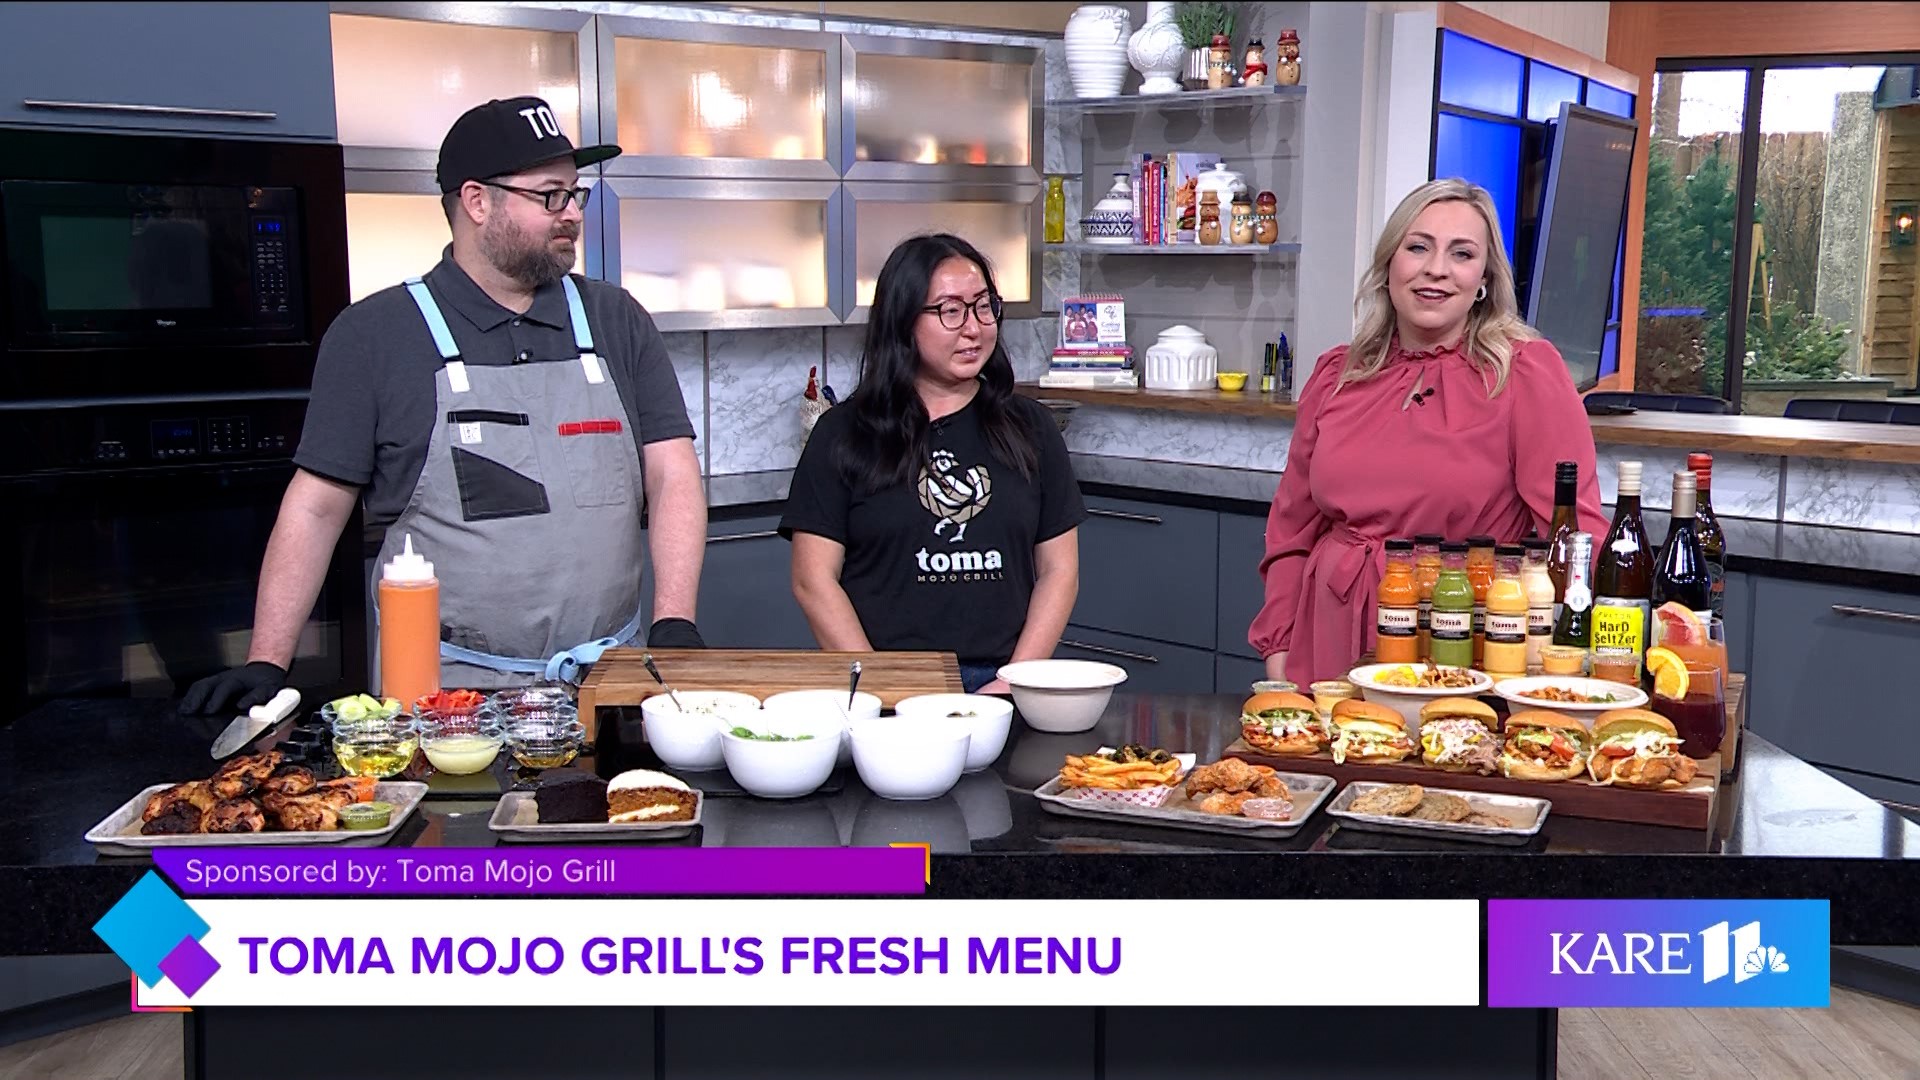 Toma Mojo Grill joins Minnesota and Company to discuss their Mediterranean-inspired menu.